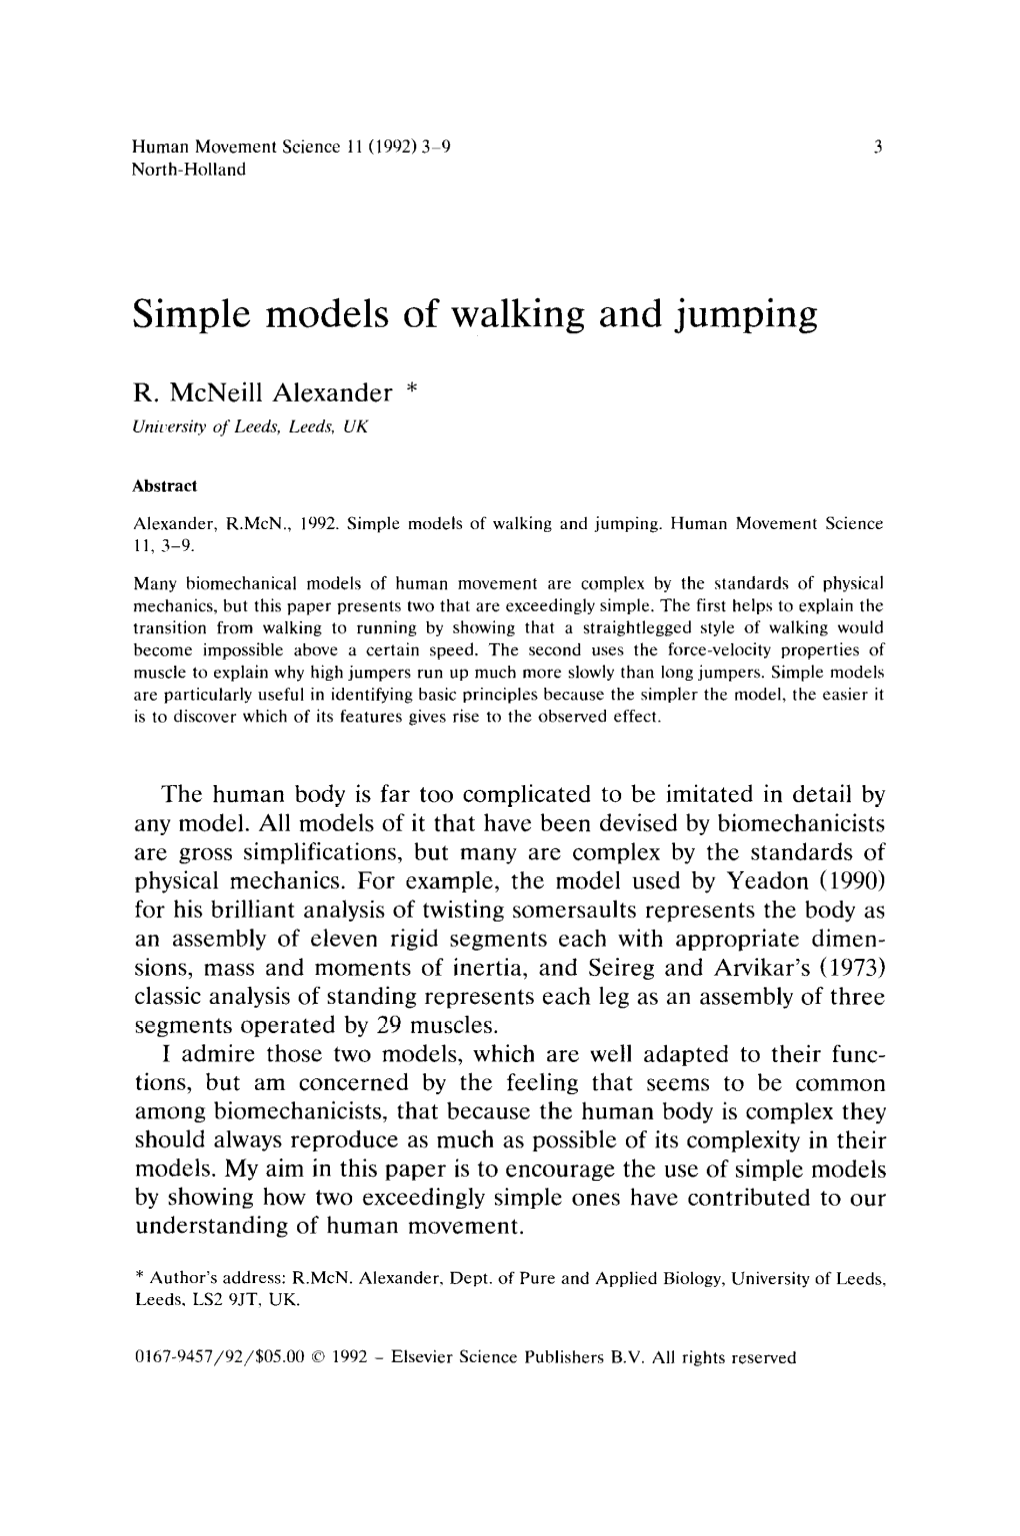 Simple Models of Walking and Jumping